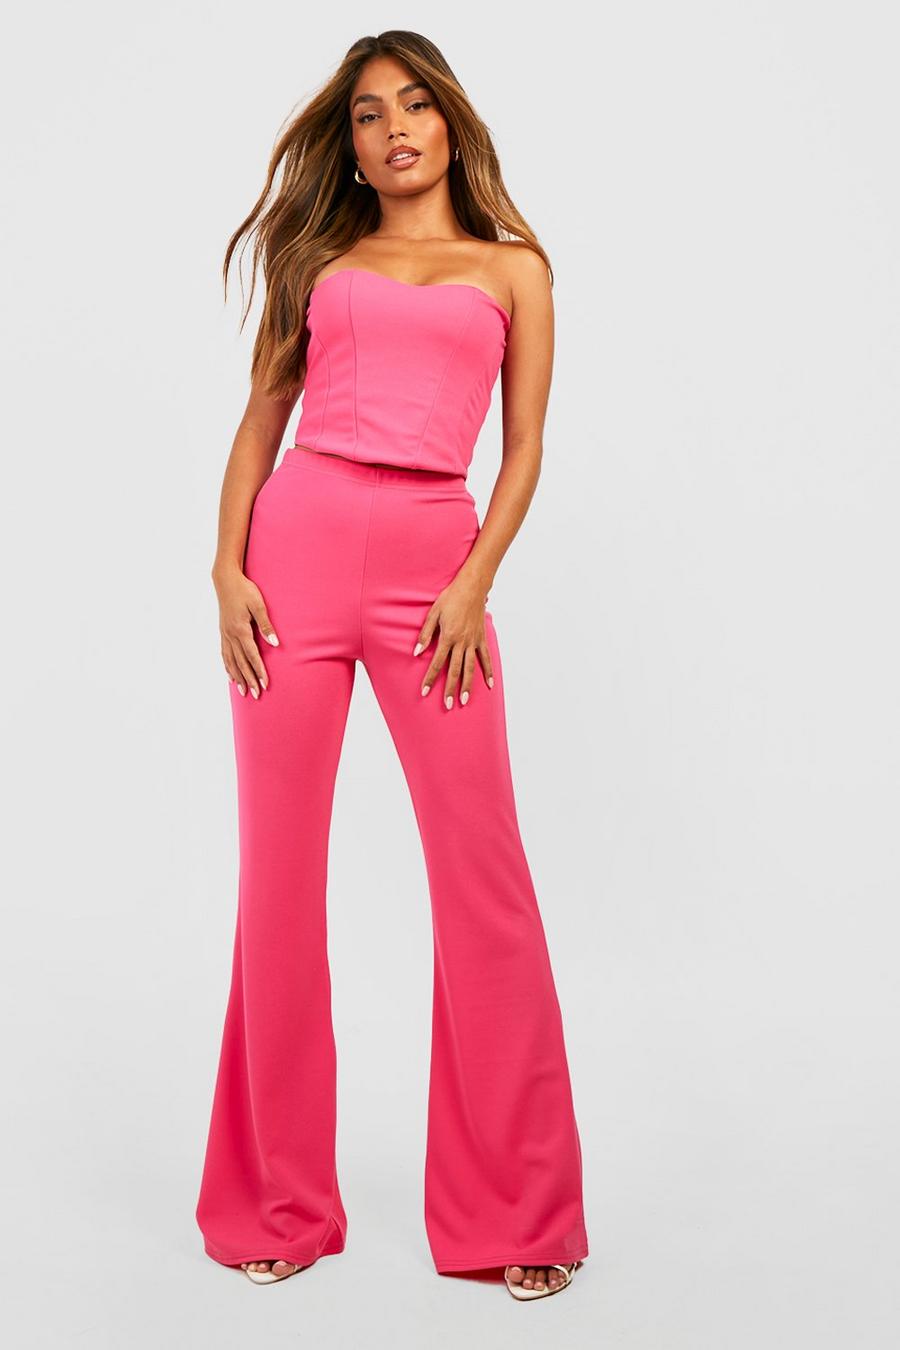 Fuchsia Corset Detail Top & Flare Pants image number 1